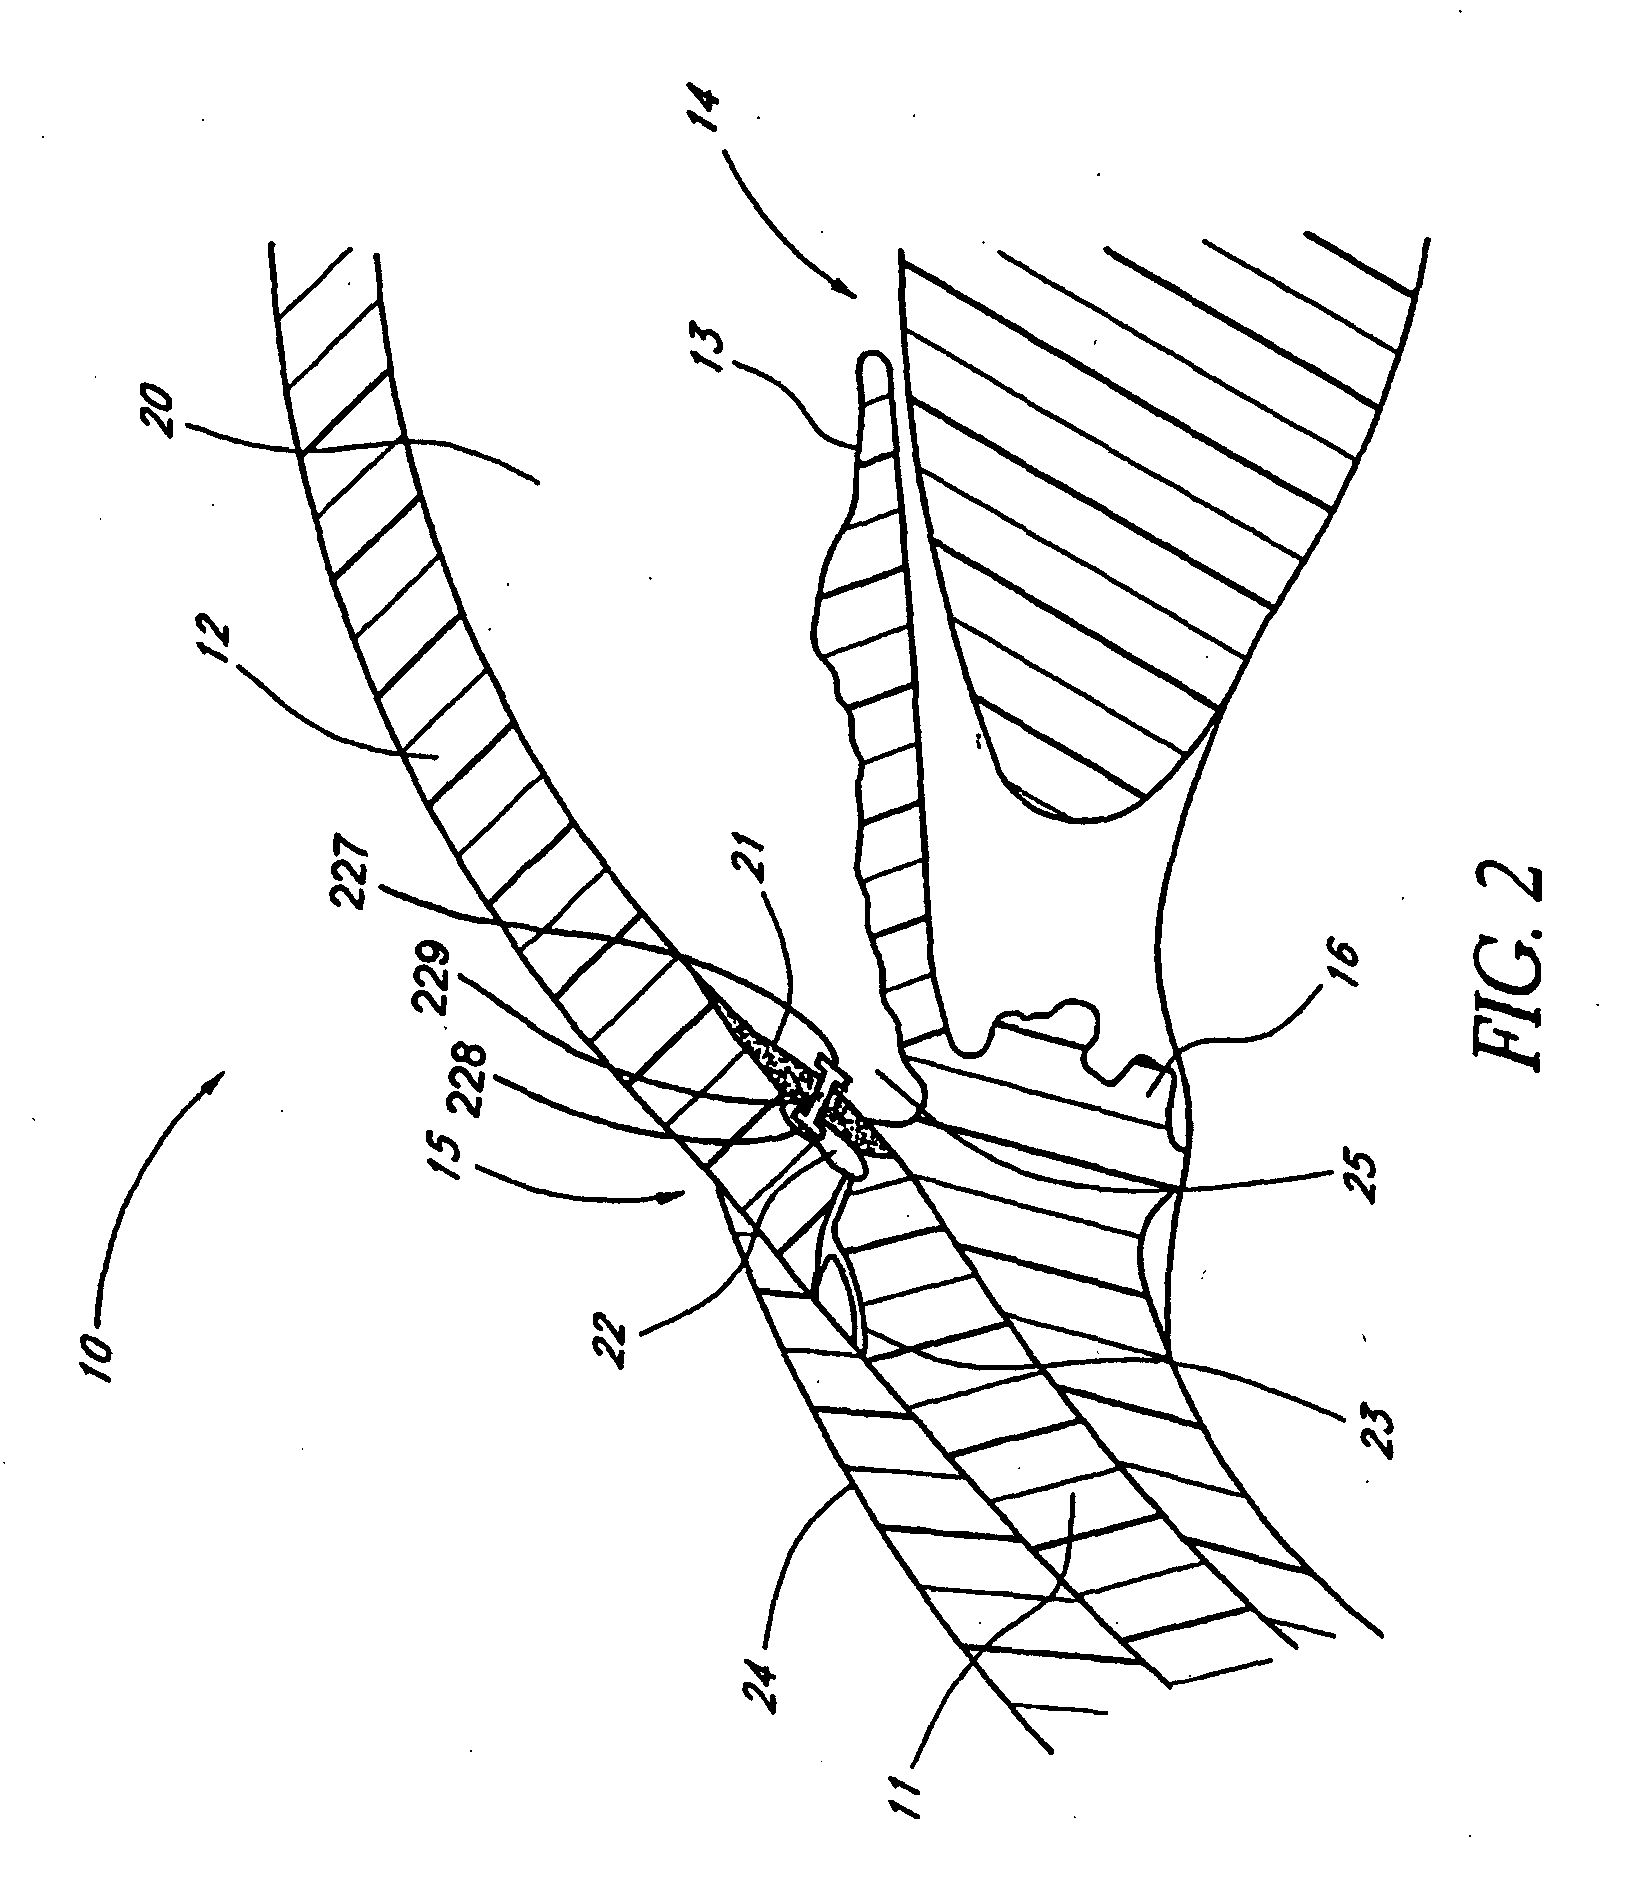 Devices and methods for glaucoma treatment